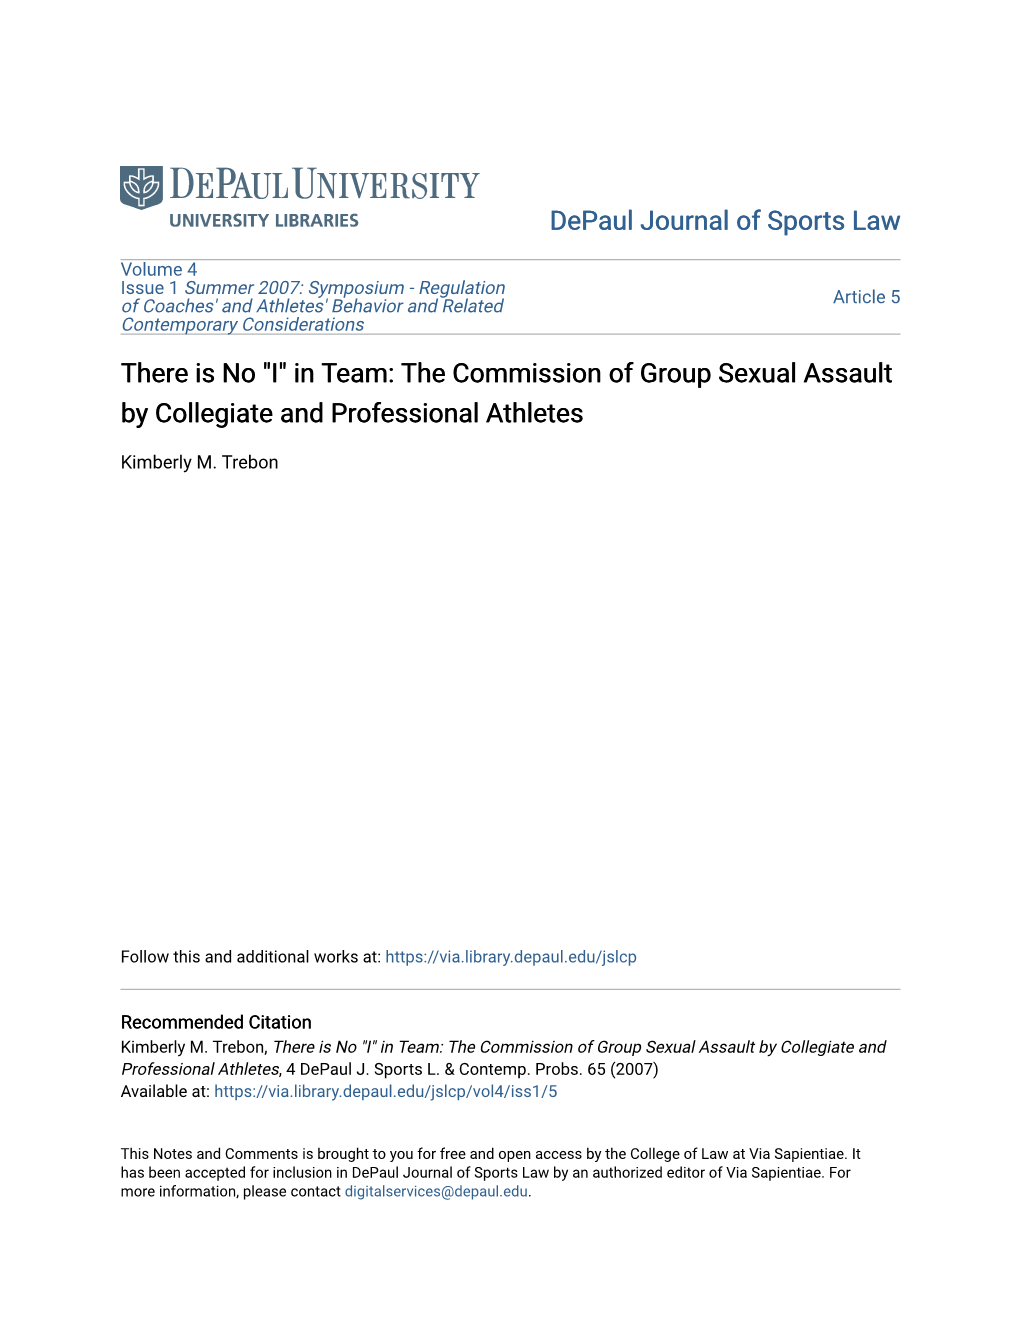 The Commission of Group Sexual Assault by Collegiate and Professional Athletes